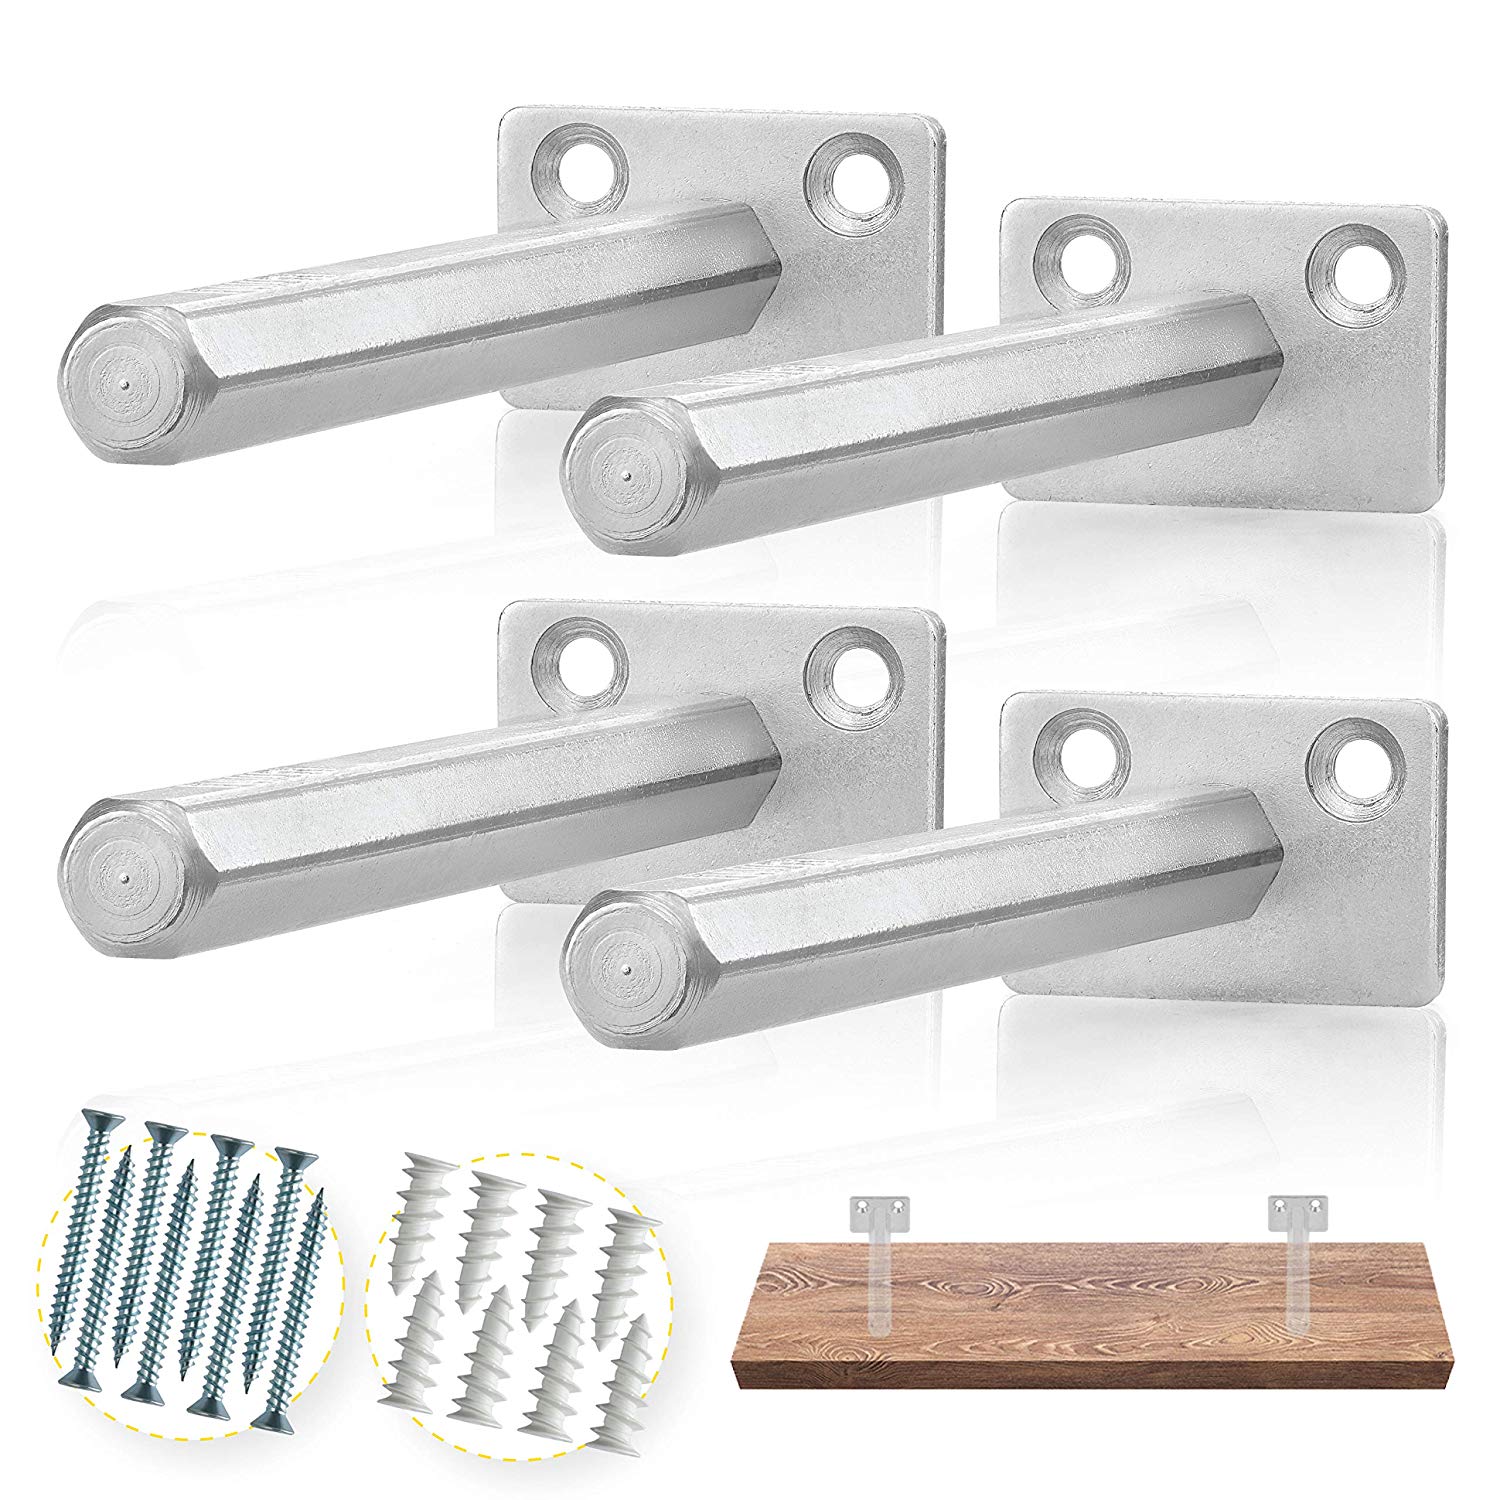 batoda floating shelf bracket pcs galvanized steel xuzl blind brackets supports hidden for wood shelves concealed support rustic wall chunky with drawer secret fixings decorative